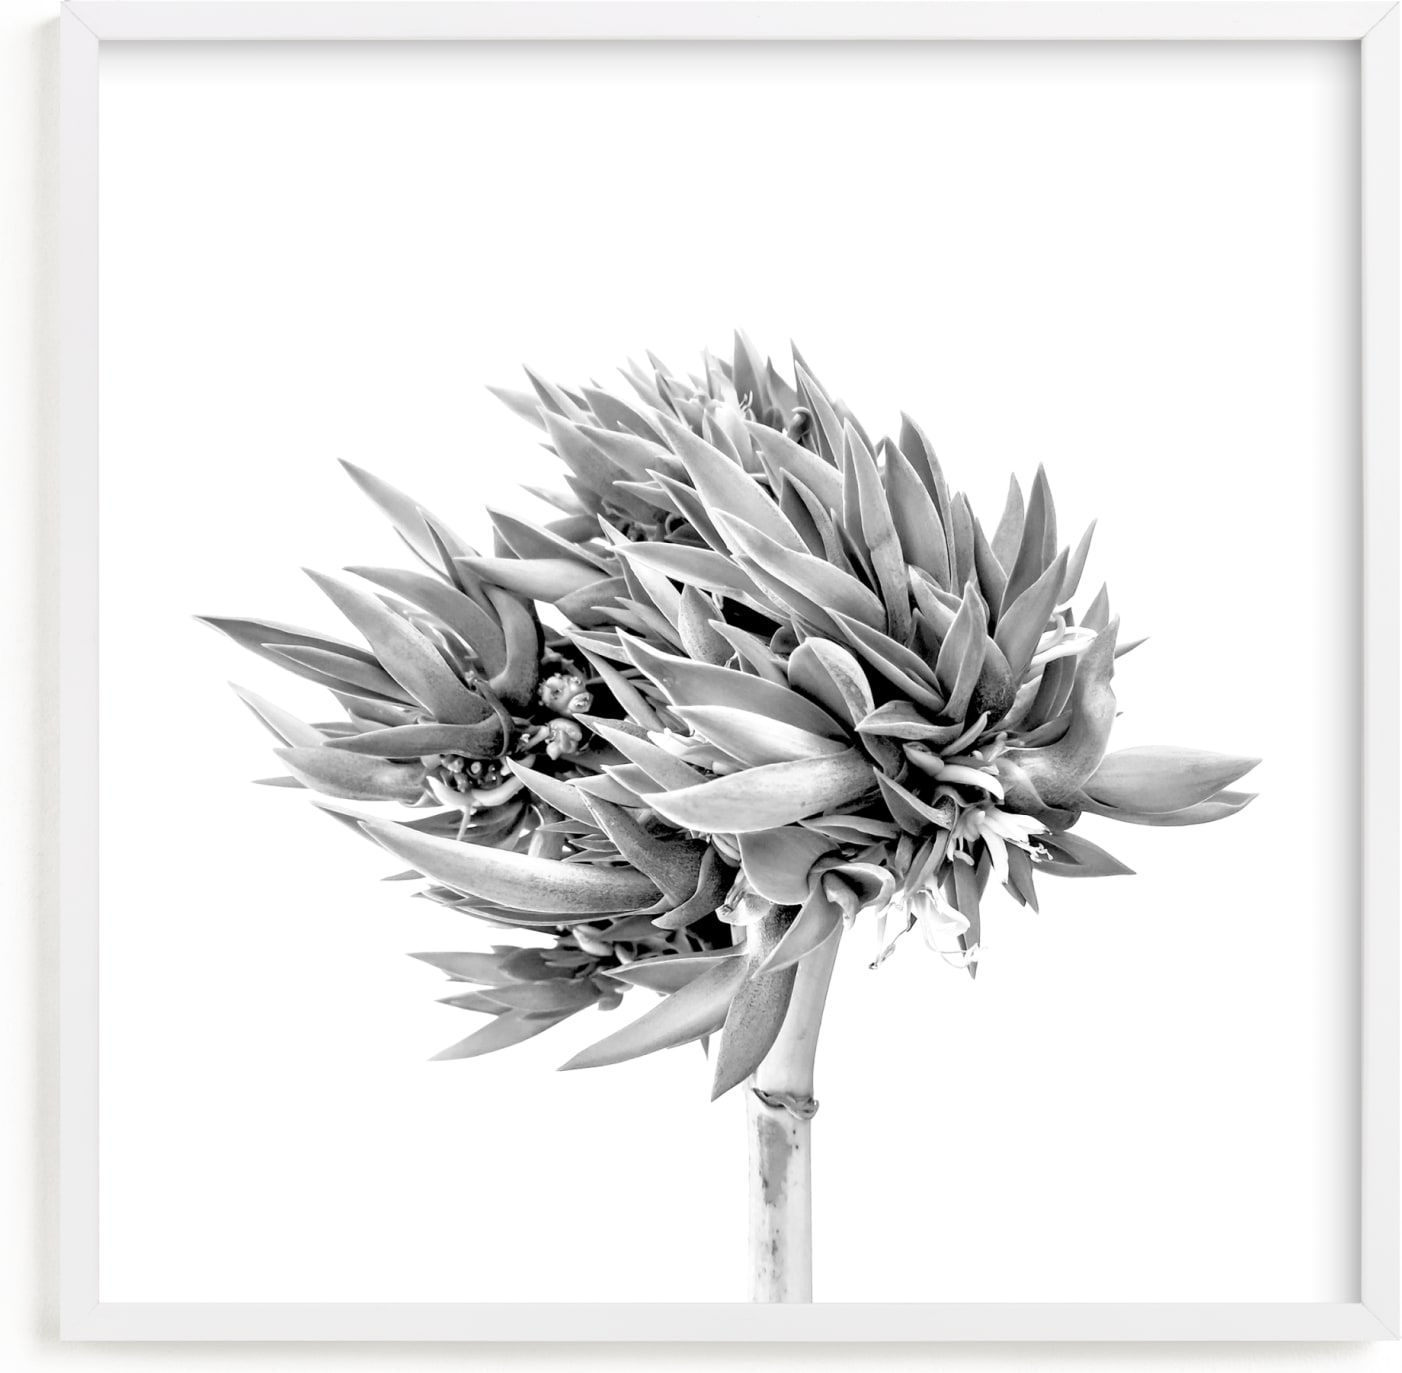 This is a black and white art by Lisa Sundin called Abode 2.